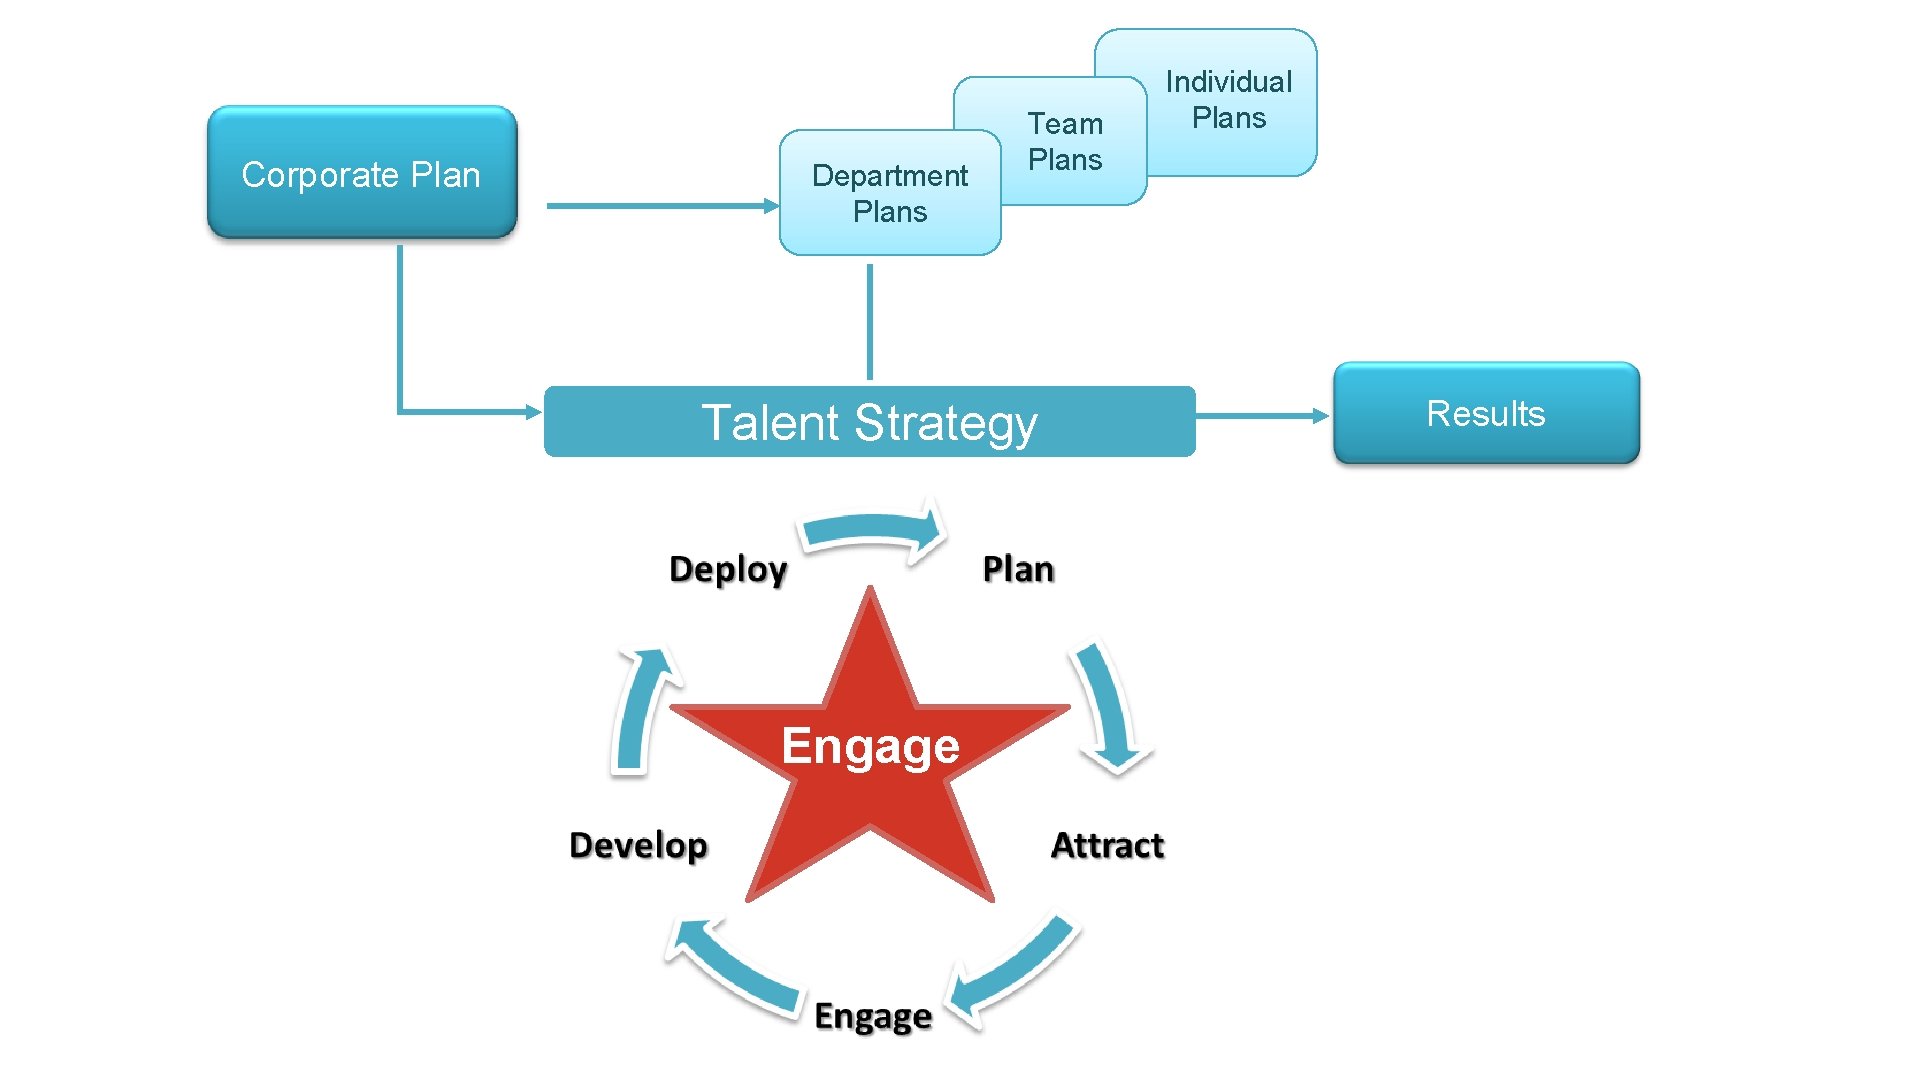 Corporate Plan Department Plans Team Plans Talent Strategy Engage Individual Plans Results 